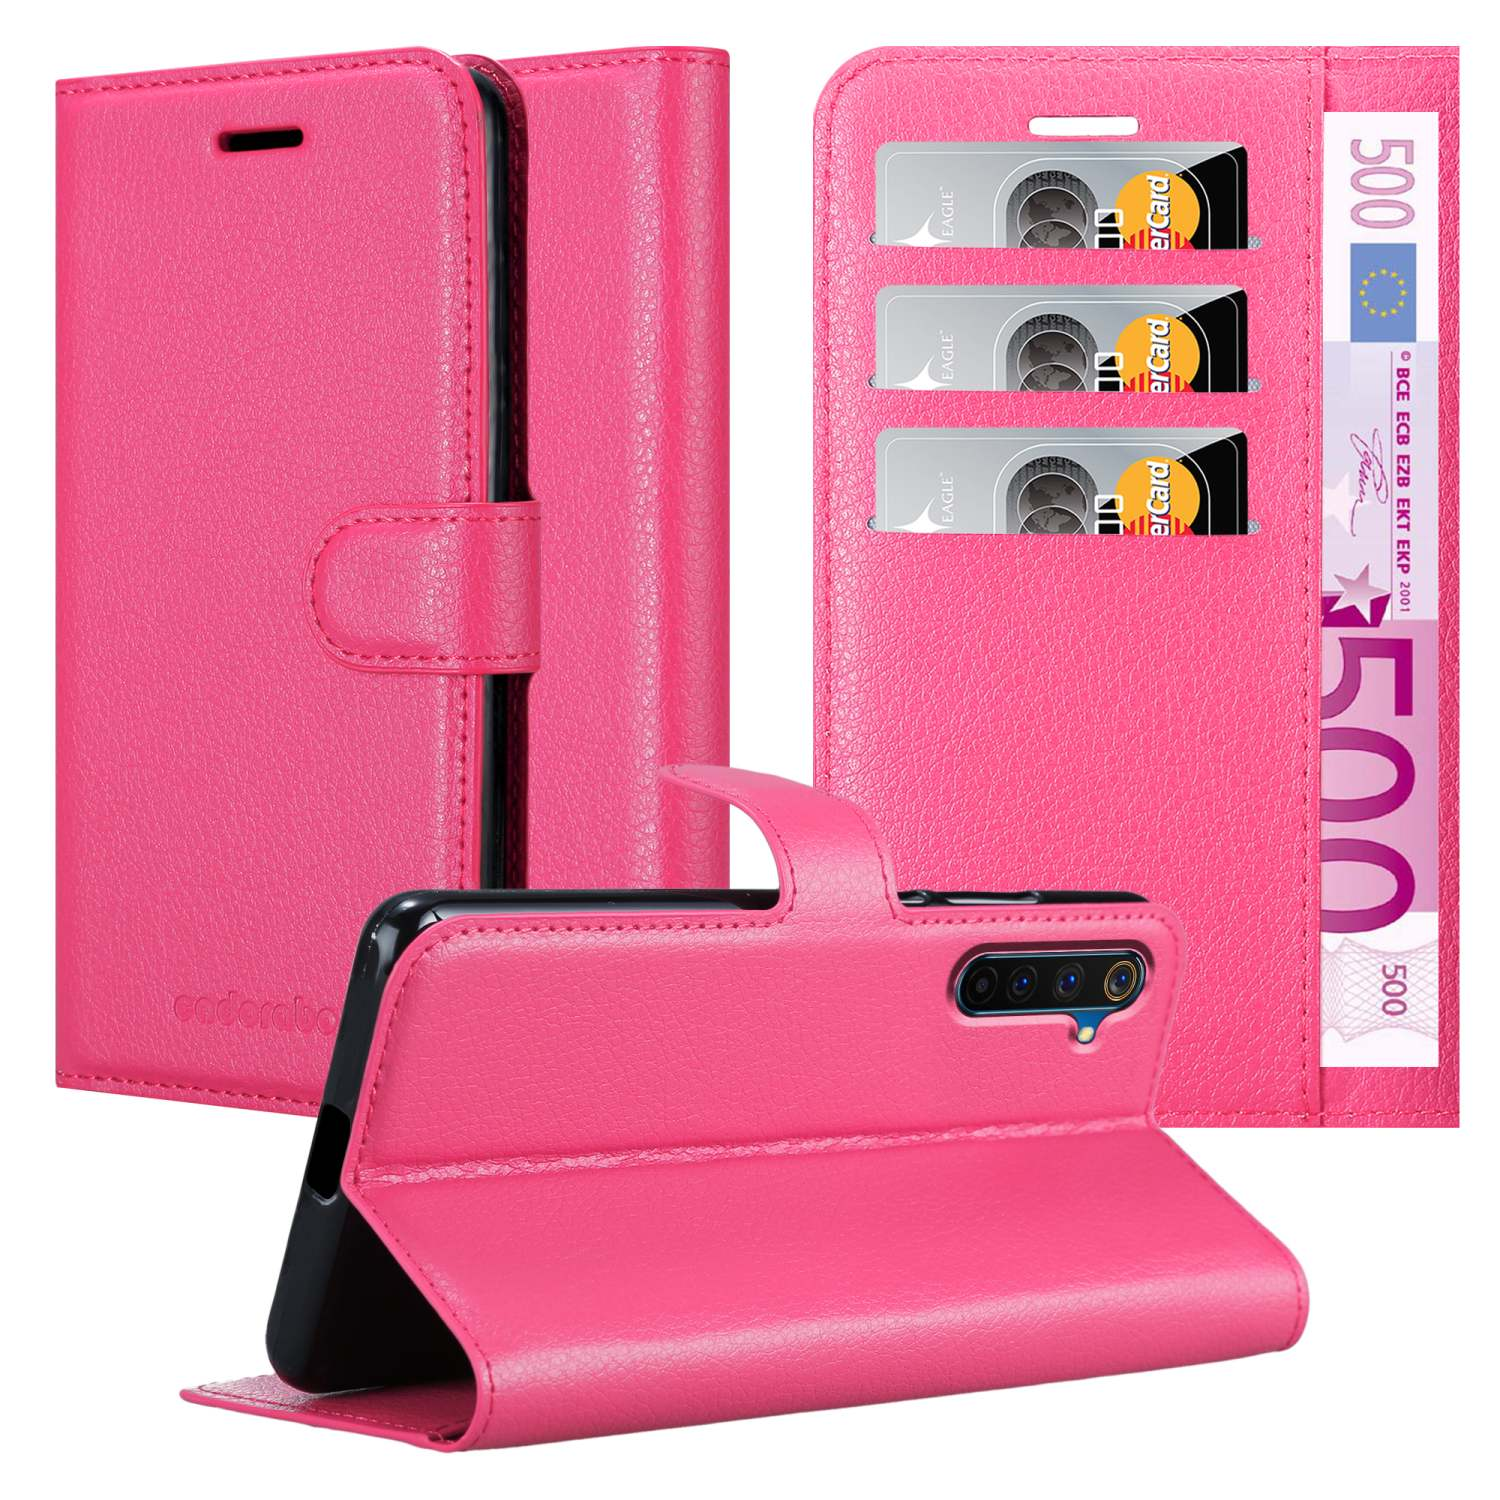 PRO, CHERRY Realme, Hülle Bookcover, 6 Book PINK Standfunktion, CADORABO